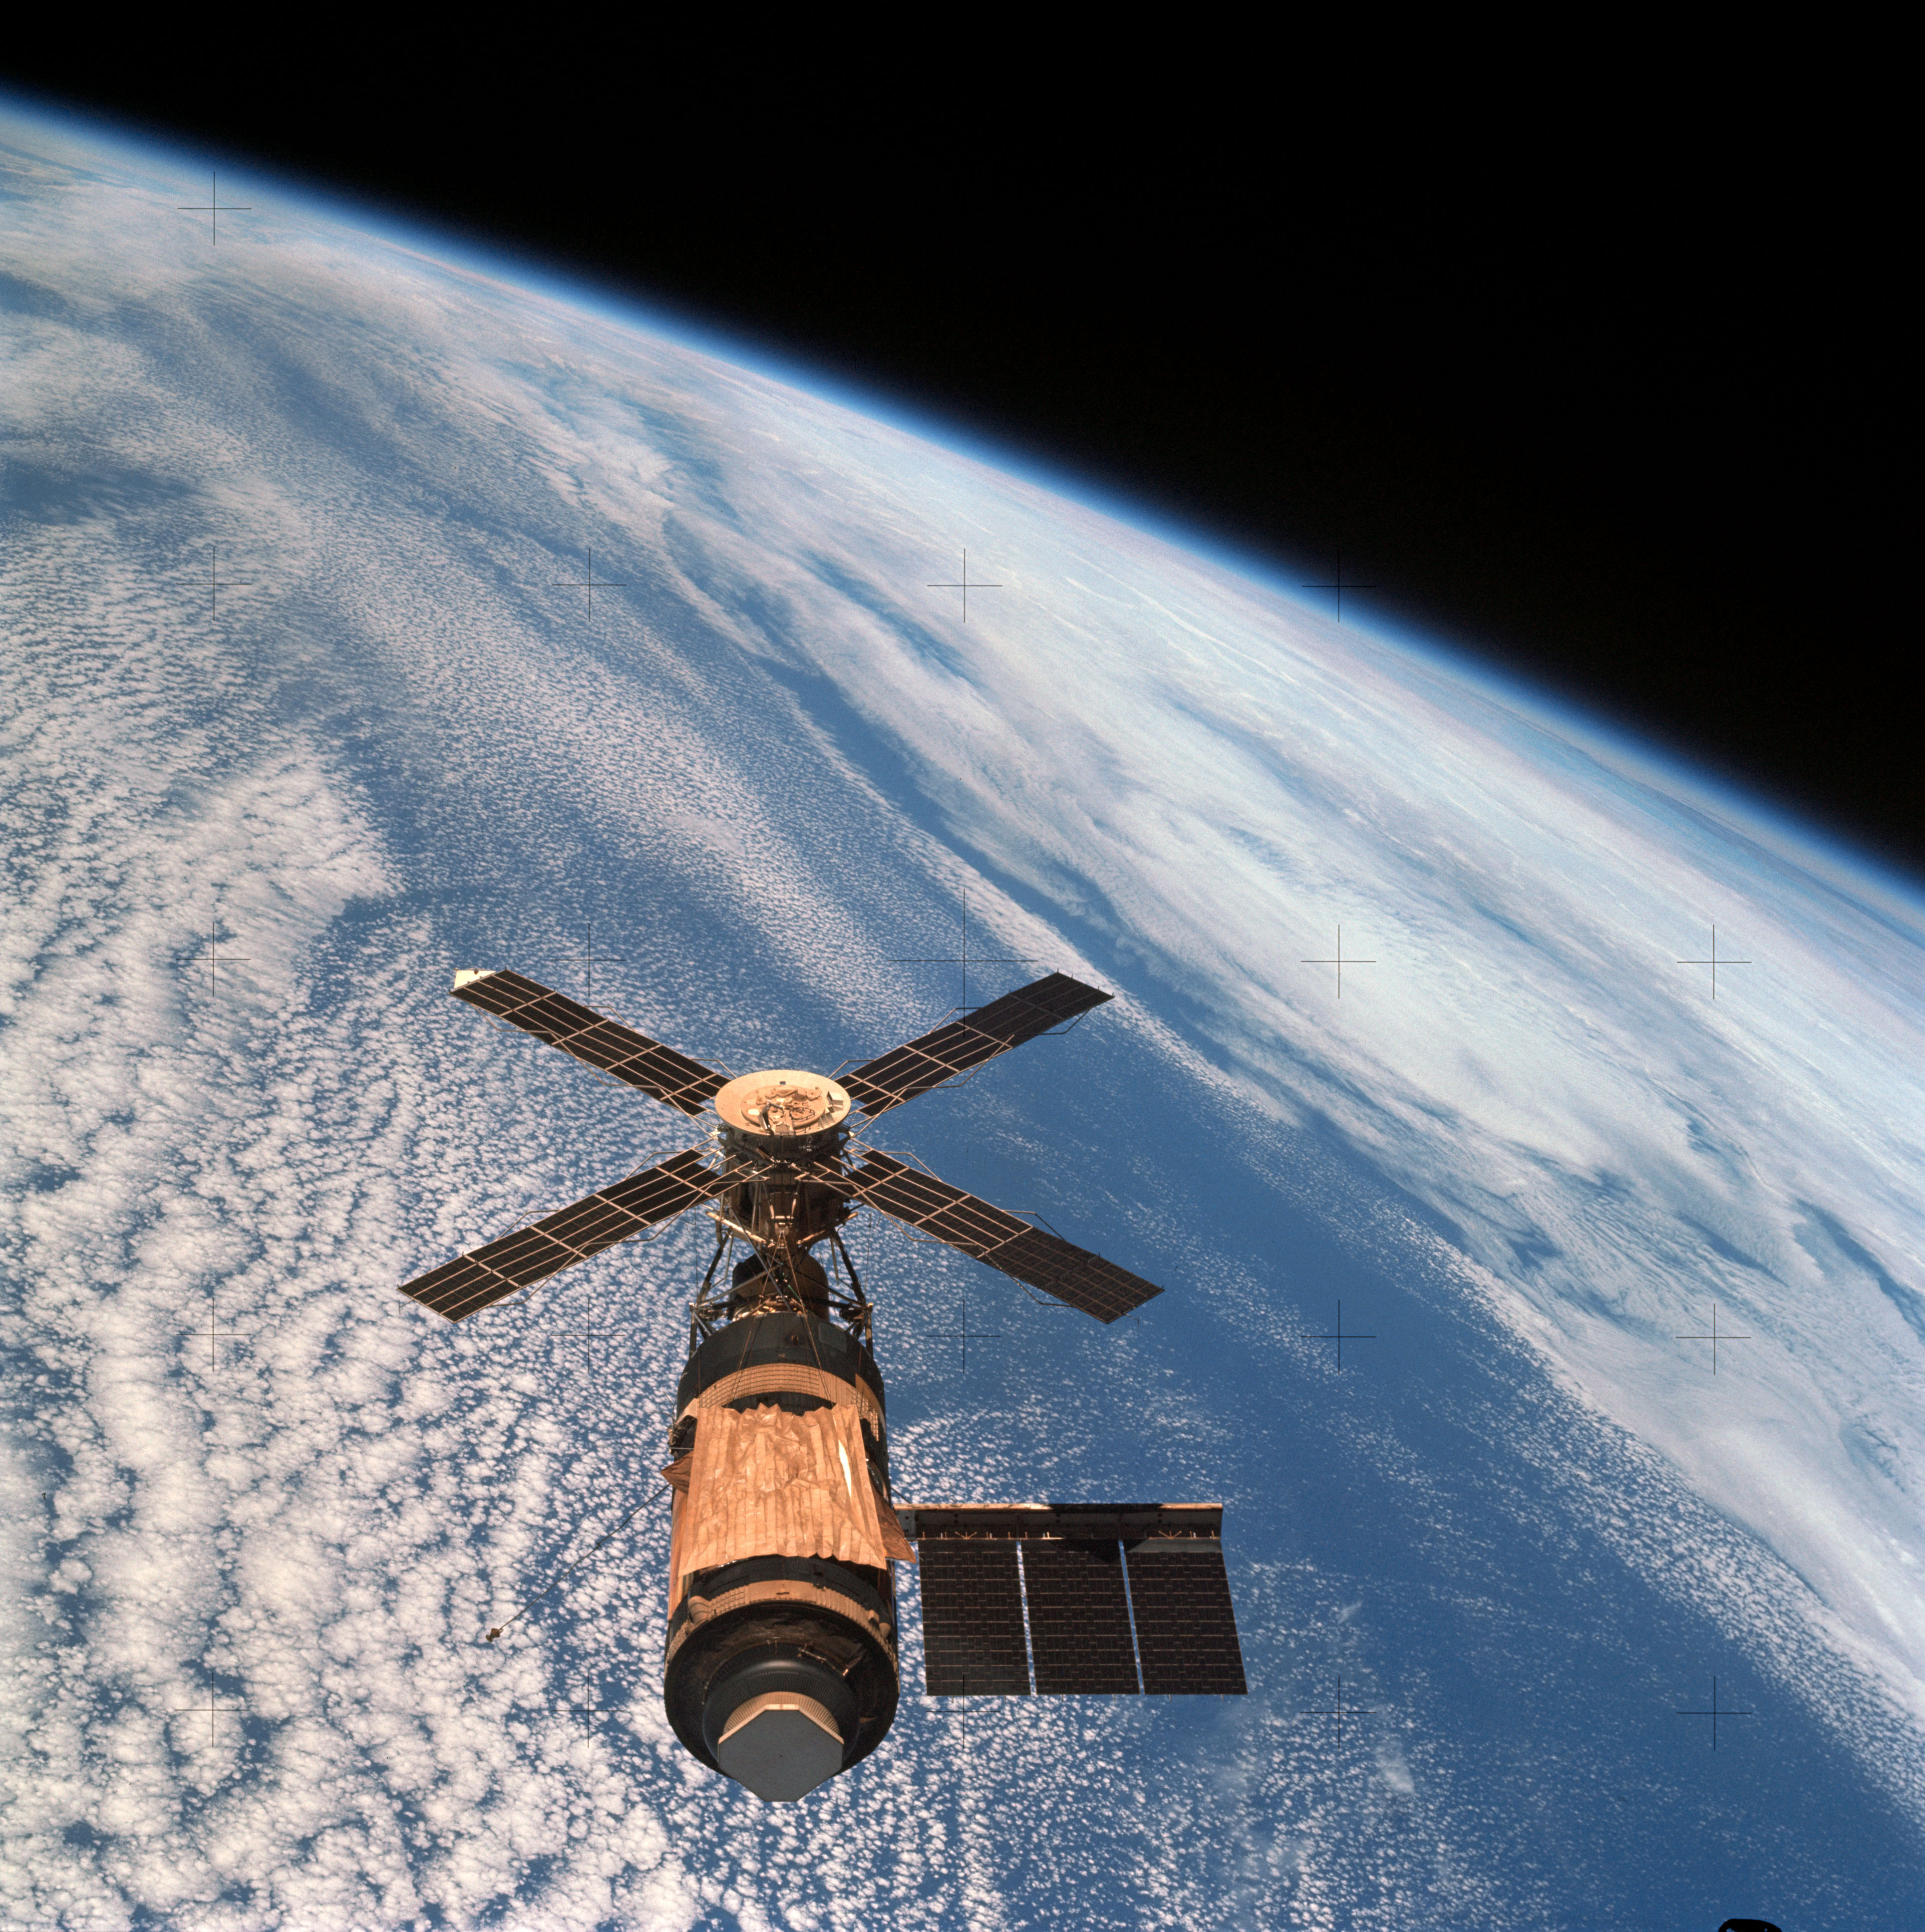 Distant view of Skylab